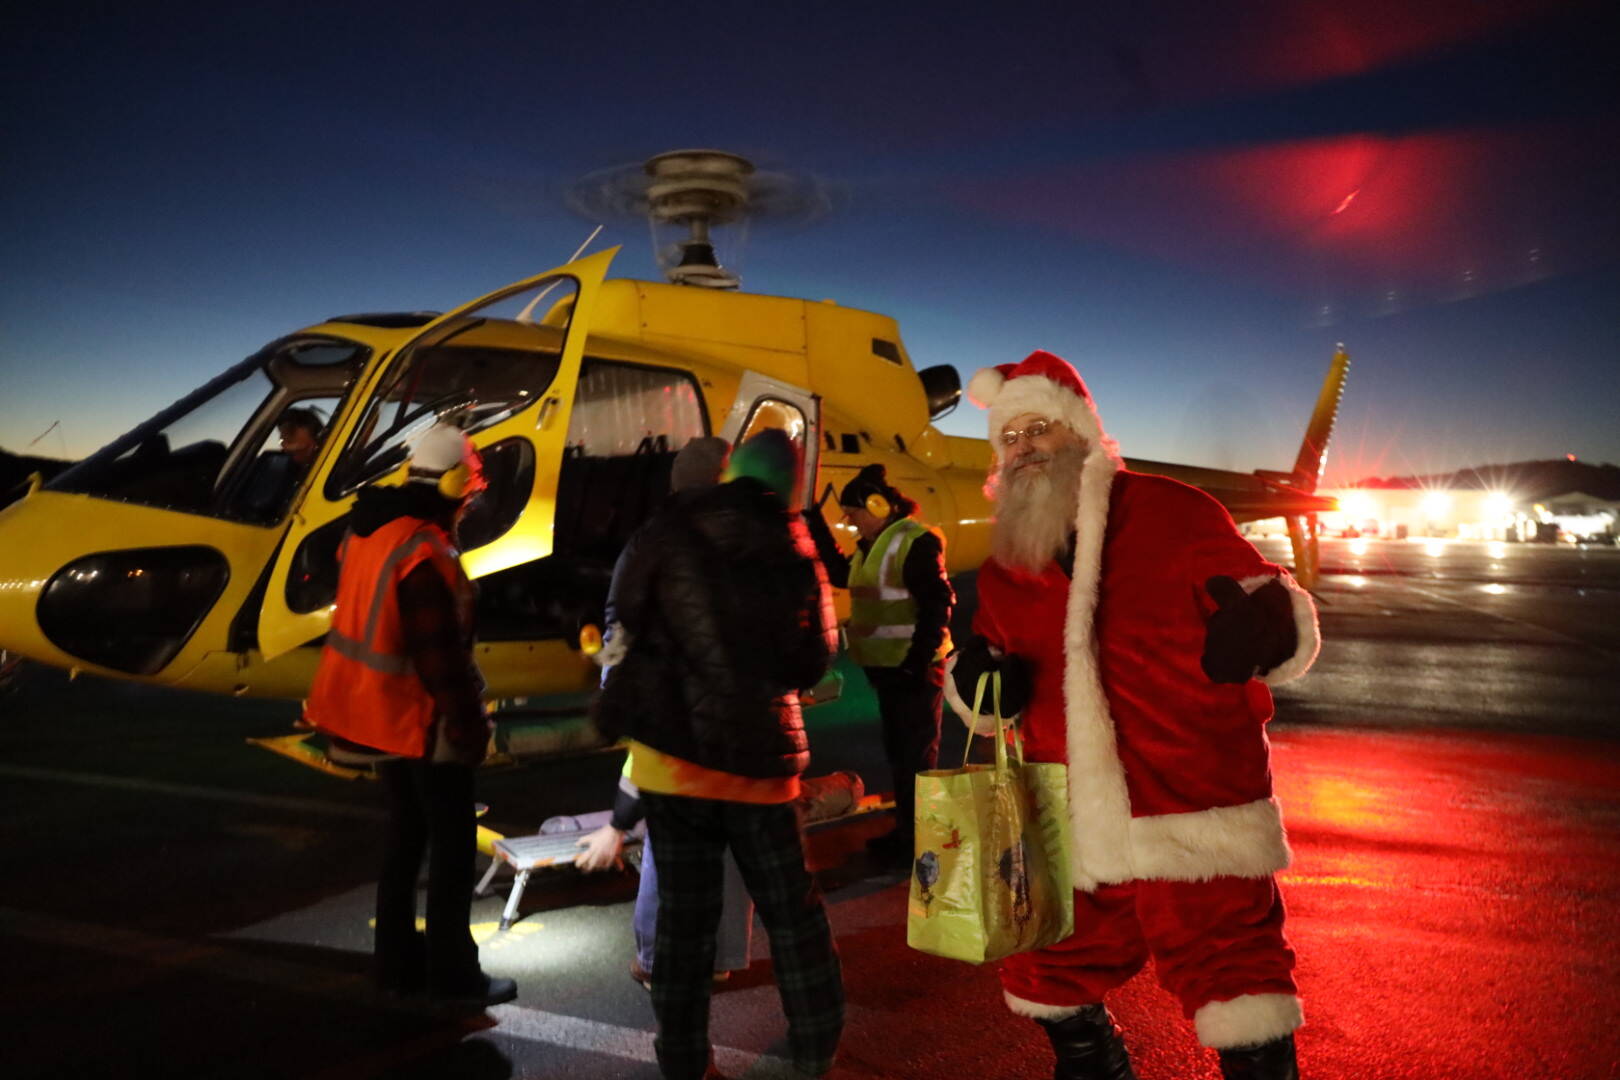 Santa steps off of a helicopter at Juneau International Airport for Christmas Light Flights. This year marked a triumphant return for the event which offers people an aerial view of Juneau during the holiday season. Flying time and staffing are donated by Coastal Helicopters and fuel from Petro Marine Services for the event. (Clarise Larson / Juneau Empire)